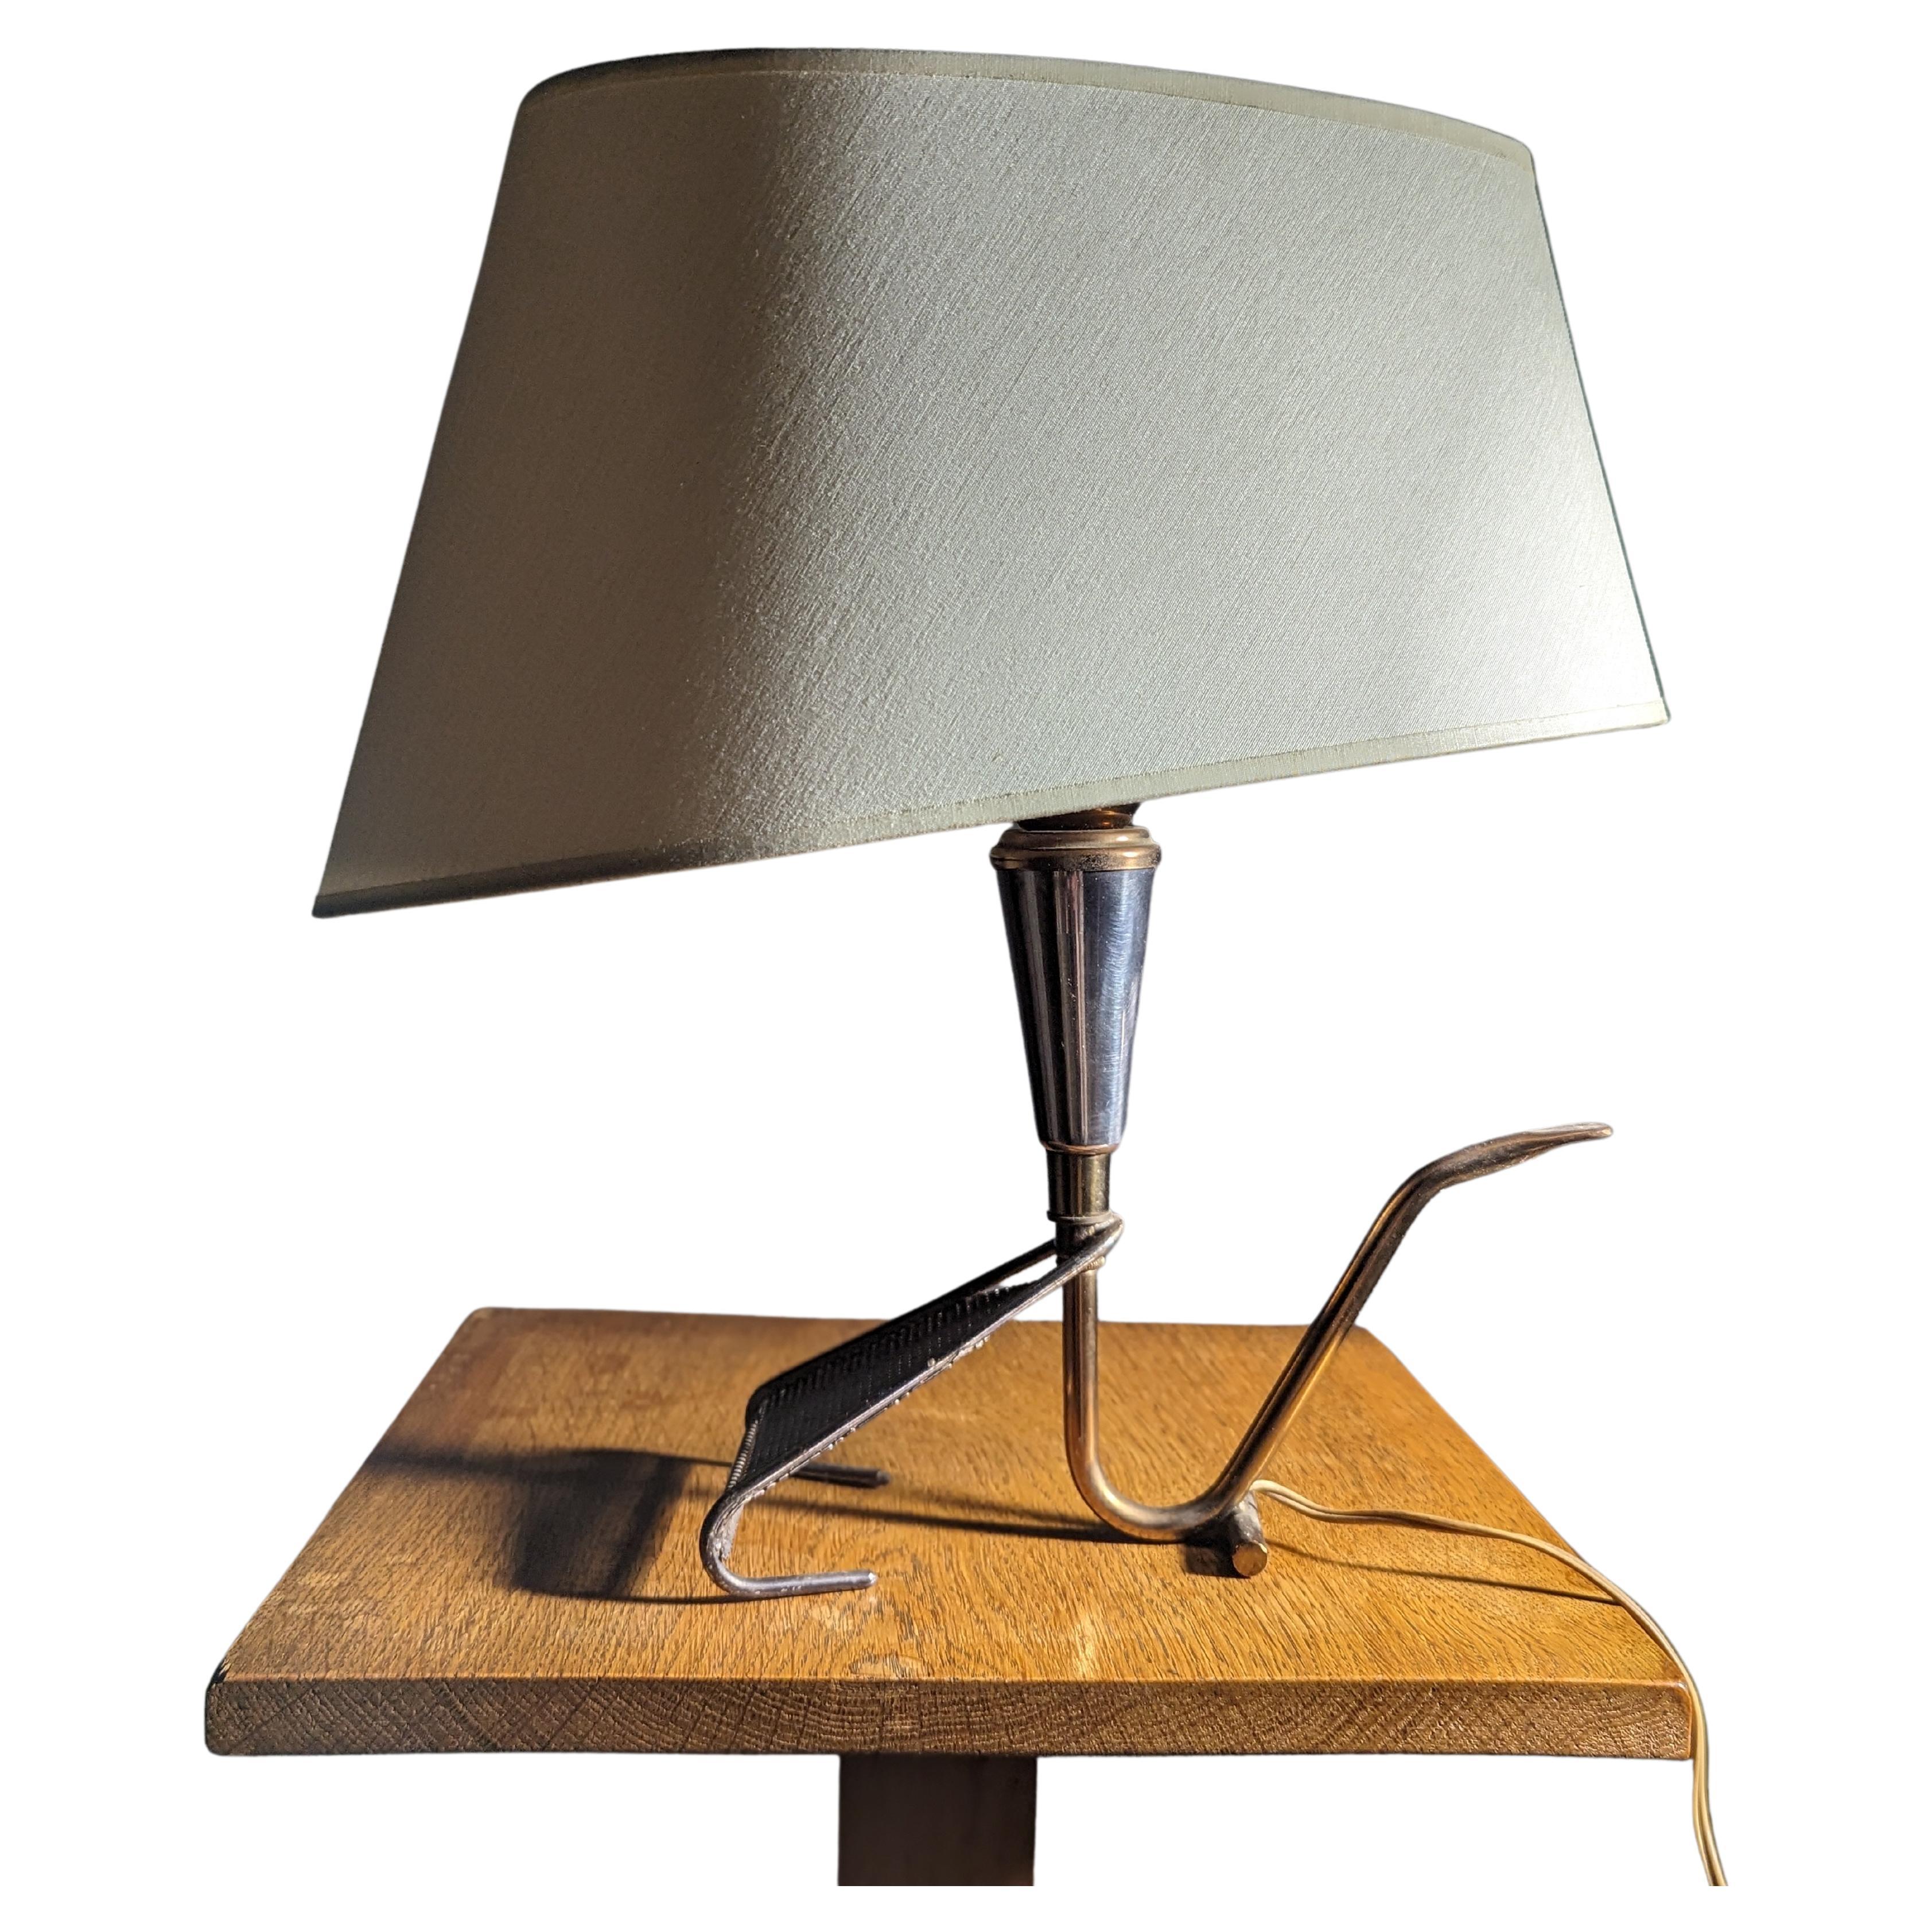 French 50's table lamp by Maison Arlus